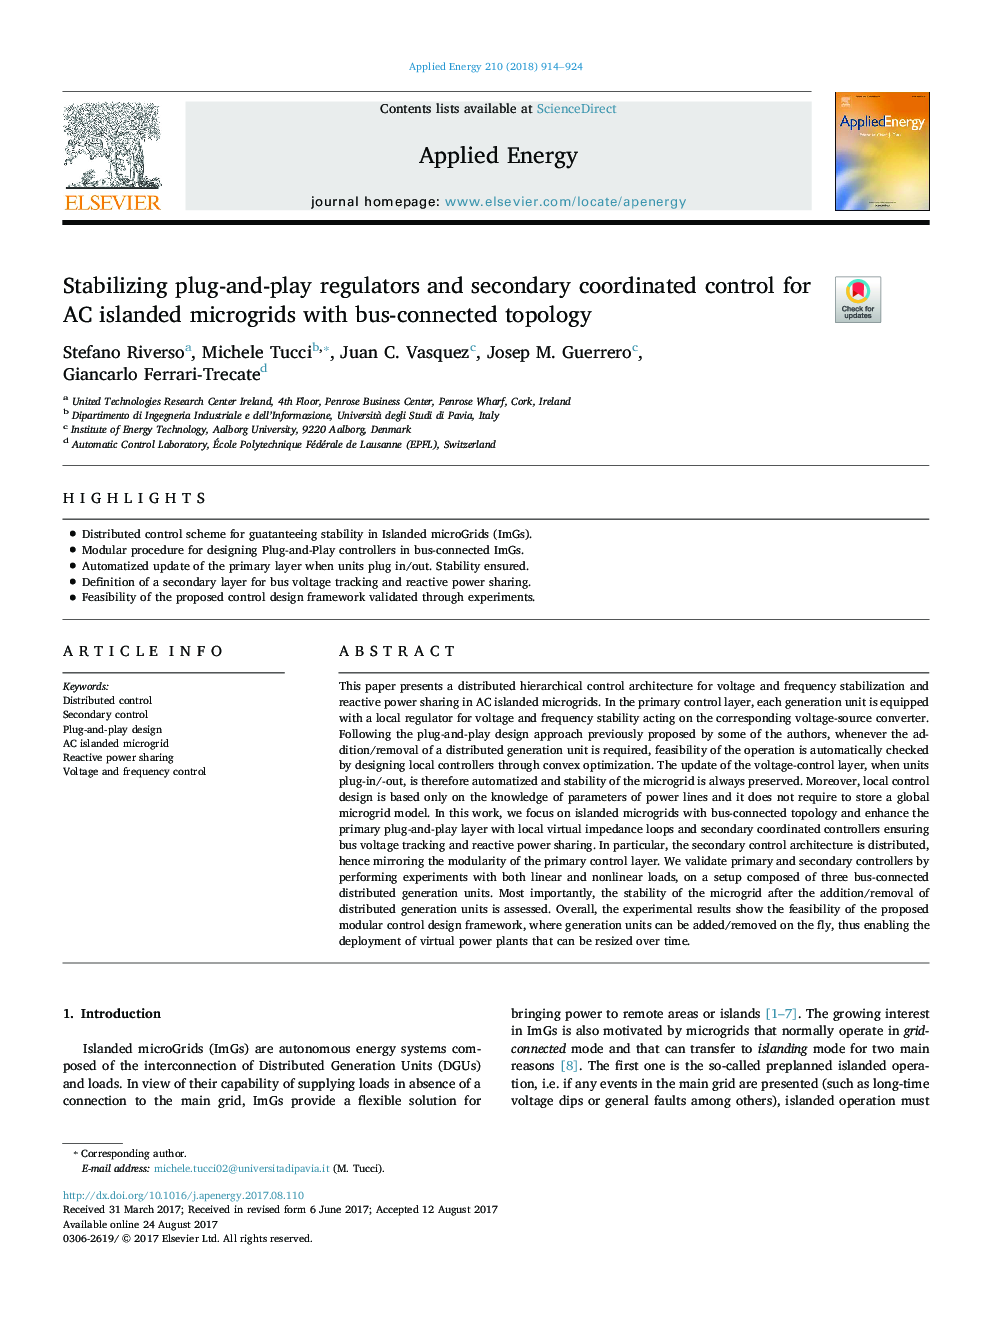 Stabilizing plug-and-play regulators and secondary coordinated control for AC islanded microgrids with bus-connected topology